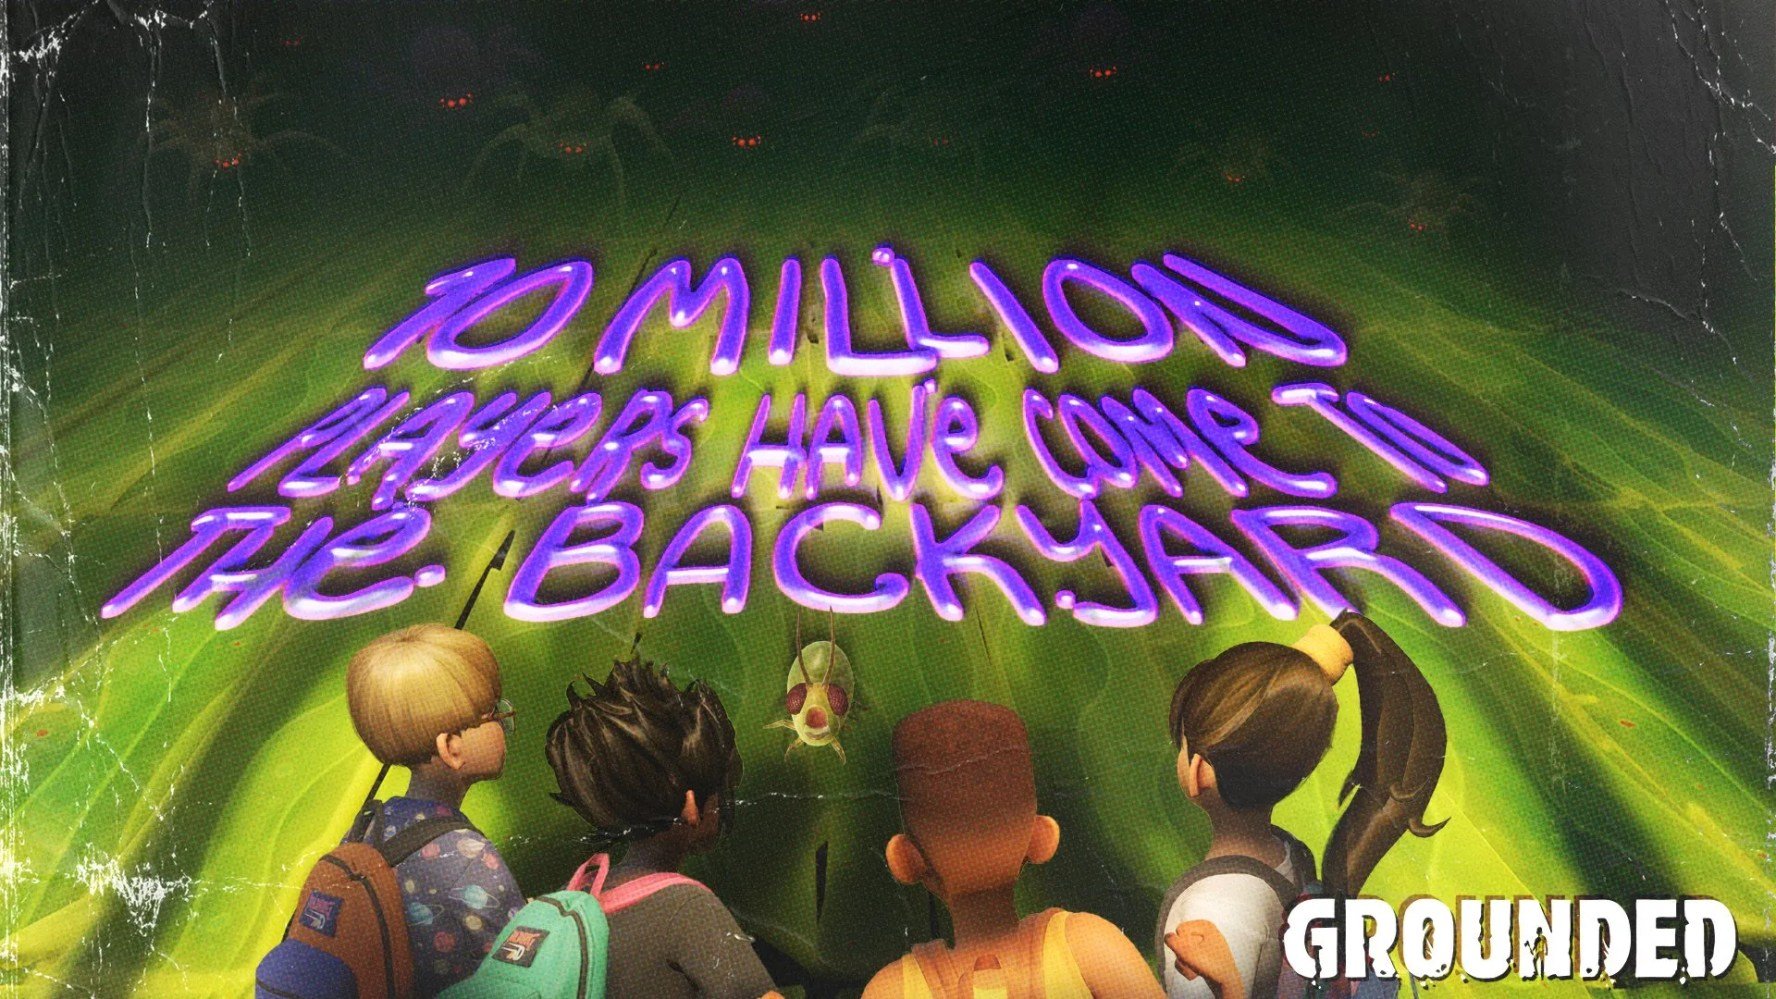 grounded-10-million-players-announcement-image-01.jpg